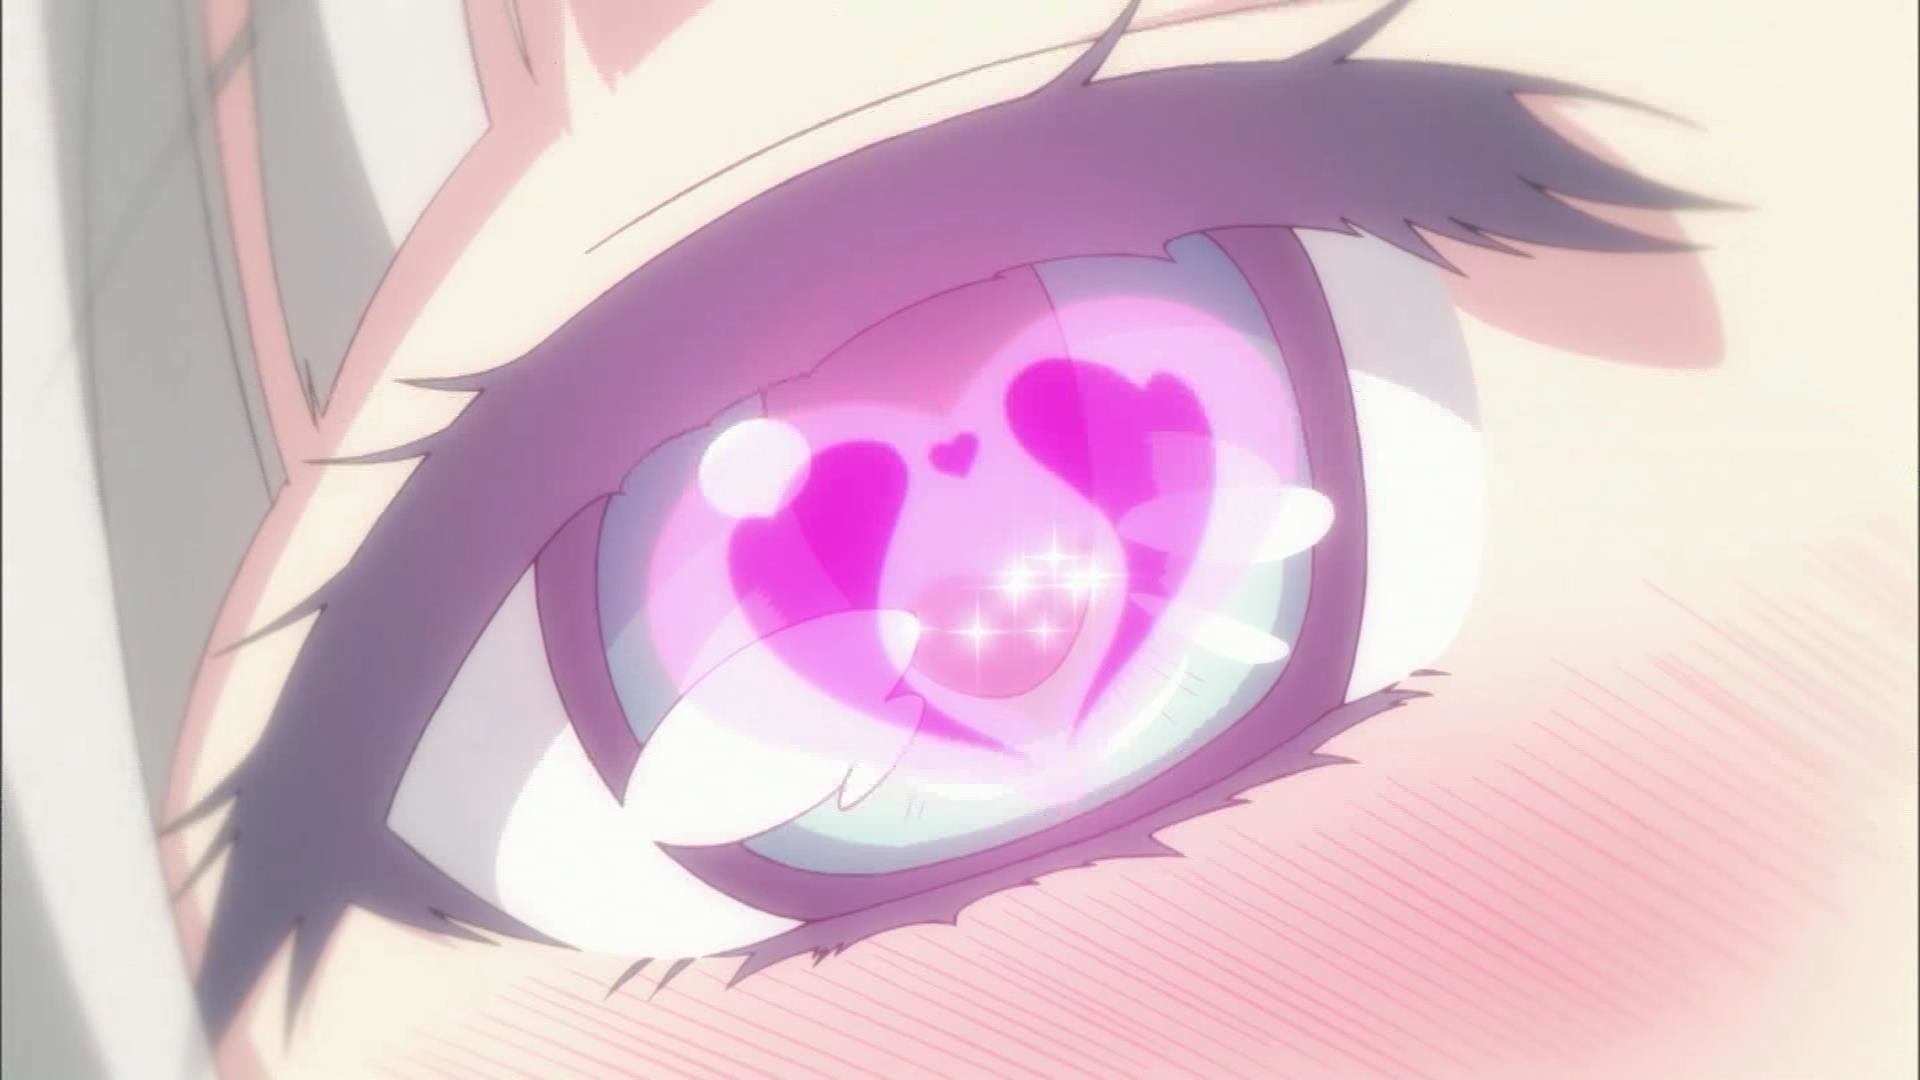 Heart pupils with extra implication